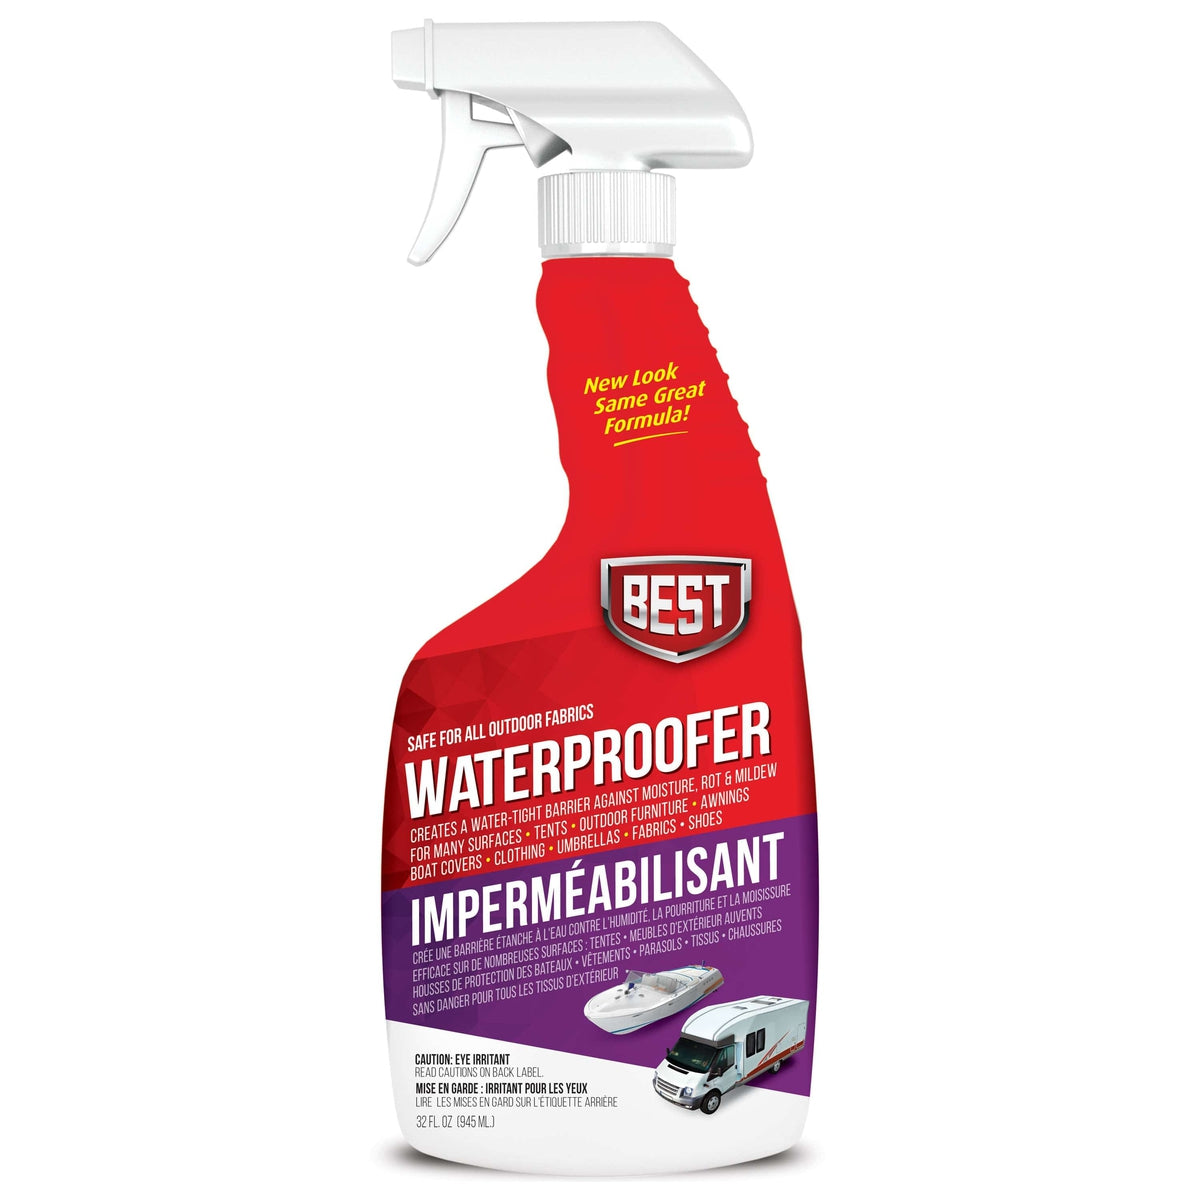 B.E.S.T. Qualifies for Free Shipping B.E.S.T. Waterproofer 32 oz #63032